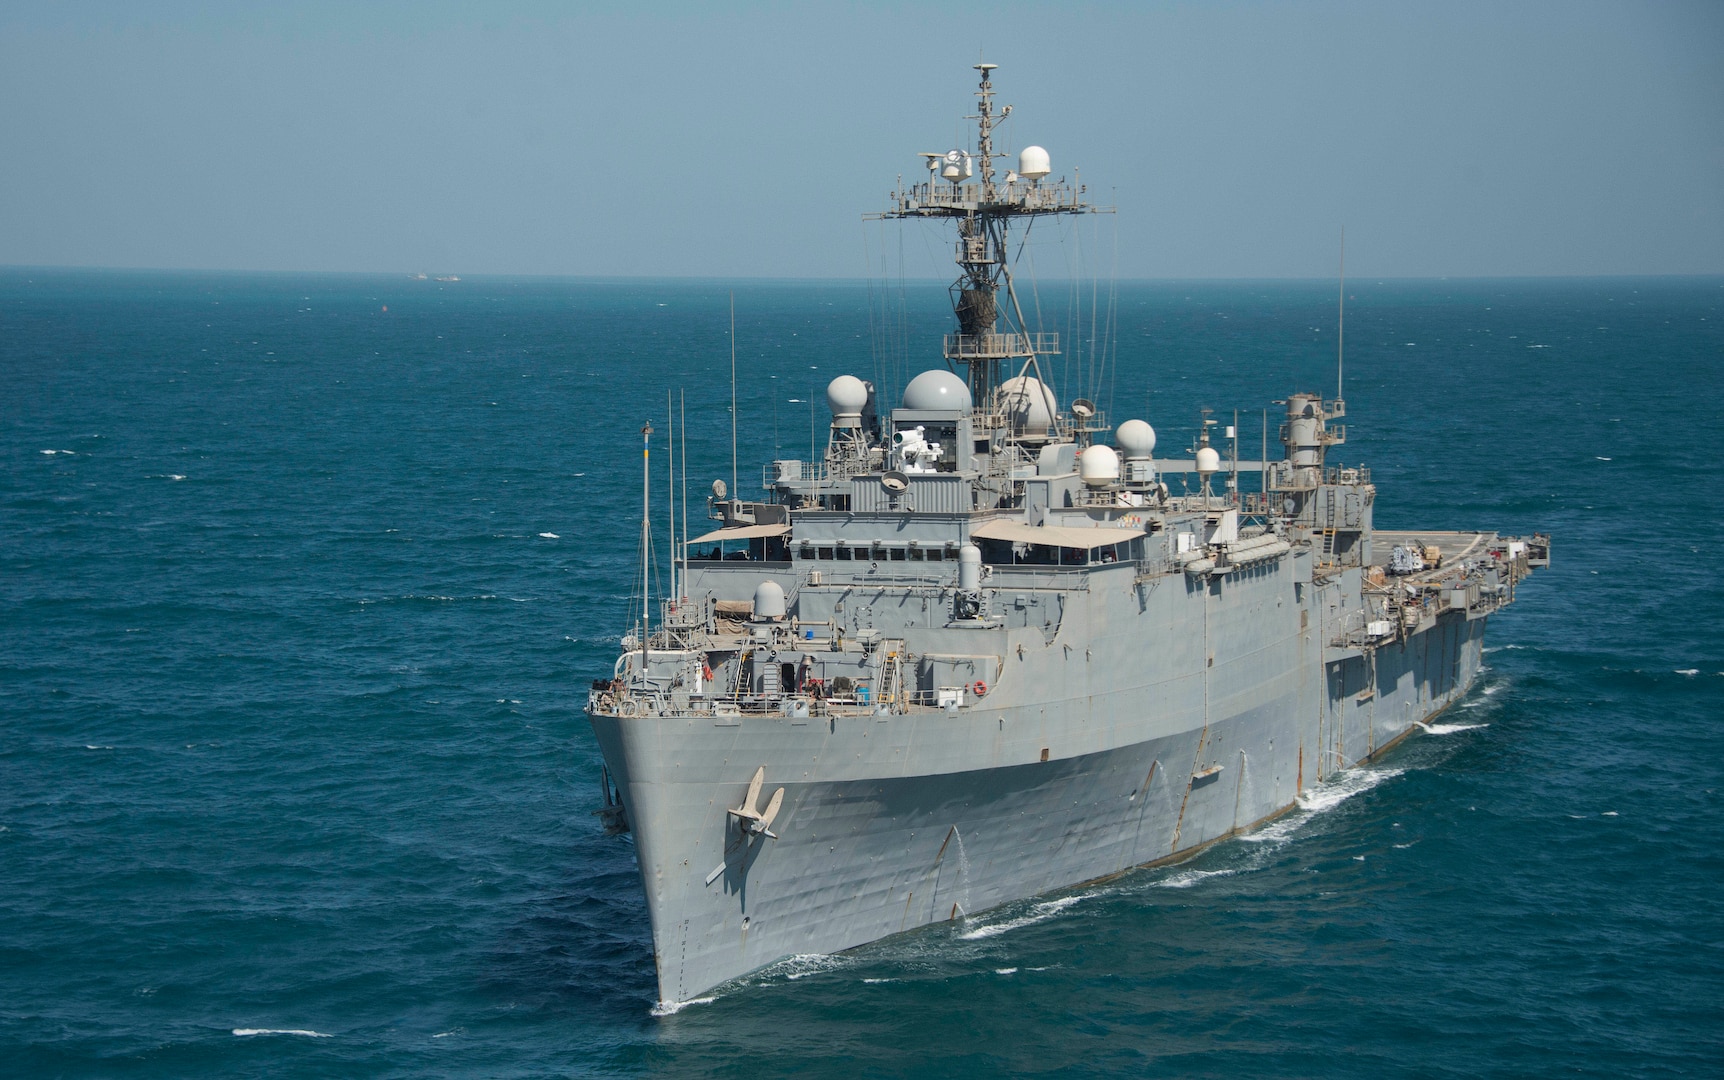 Official U.S. Navy file photo of the afloat forward staging base (interim) USS Ponce (AFSB(I) 15) transiting the Arabian Gulf. Ponce is equipped with the Laser Weapon System (LaWS), a technology demonstrator built by Naval Surface Warfare Center Dahlgren Division (NSWCDD). LaWS can be directed onto targets from the radar track obtained from an MK 15 Phalanx Close-In Weapon System or other targeting sources. NSWCDD engineer Alan Tolley - the chief engineer of all surface Navy radars, including radars used by LaWS aboard the Ponce - was selected as a National Society of Professional Engineers' (NSPE) 2015 Federal Engineer of the Year Award (FEYA) Agency winner, NSWCDD announced Dec. 10. Tolley was commended for his key role in delivering vital warfare capabilities to the Fleet. The FEYA is selected by a panel of judges established by National Society of Professional Engineers (NSPE) professional engineers in government who consider engineering achievements, education, continuing education, professional/technical society activities, NSPE membership, awards and honors, and civic and humanitarian activities.